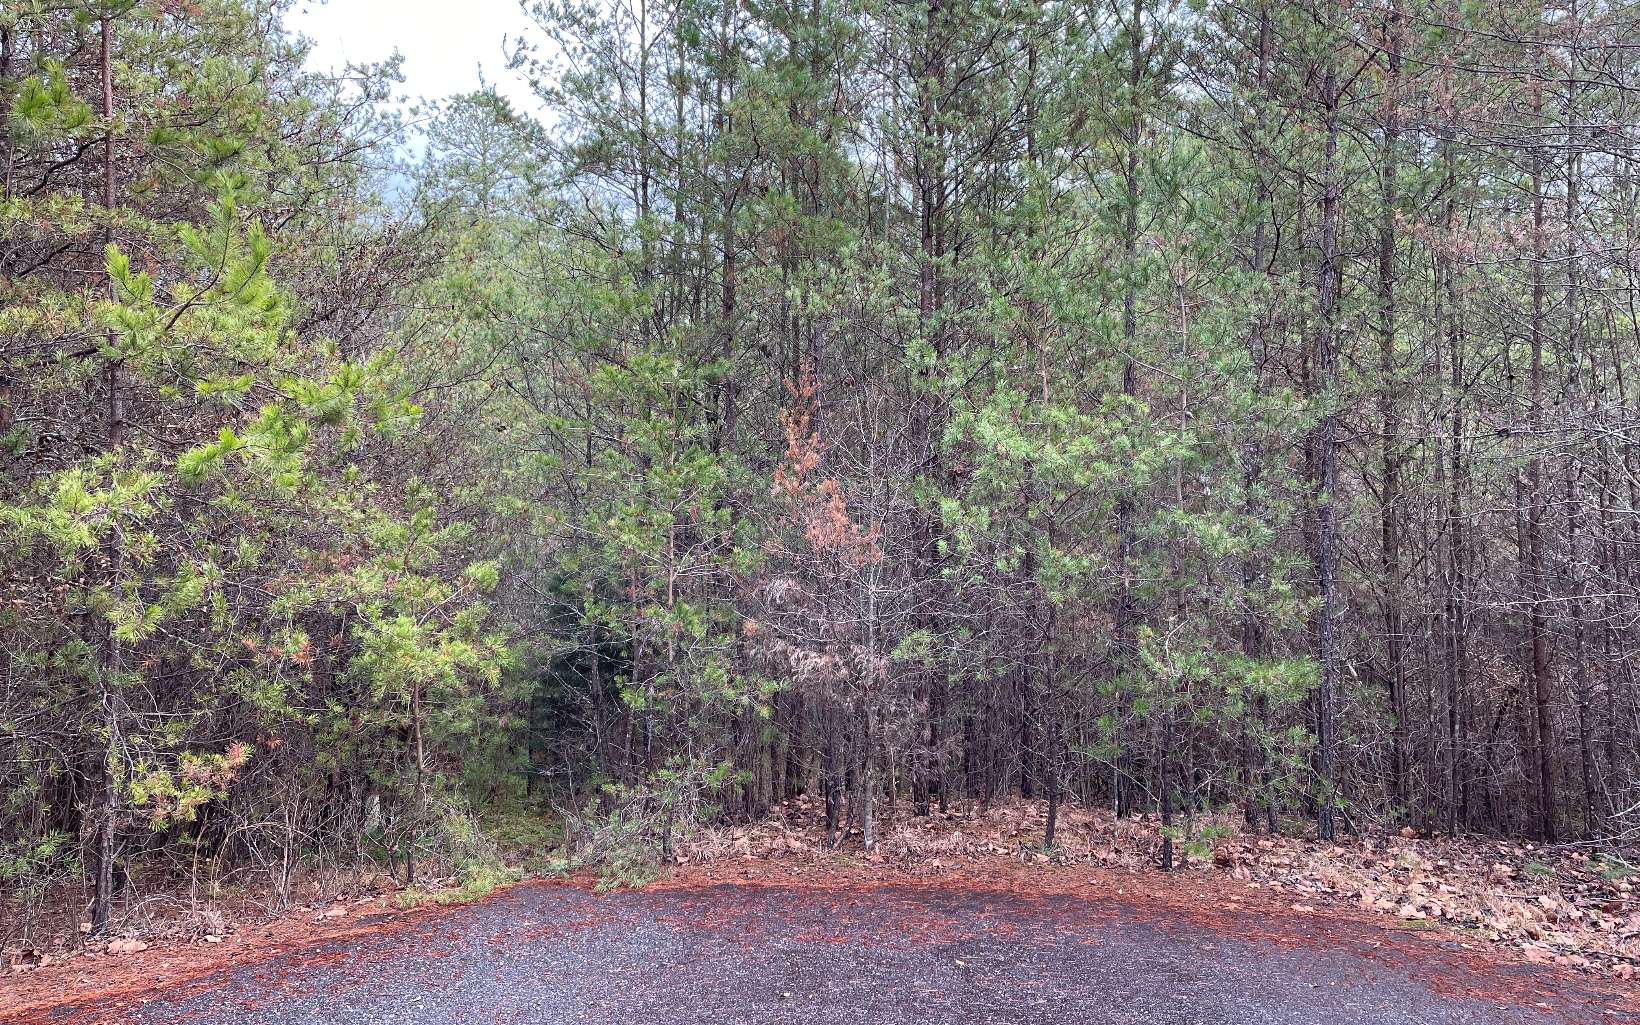 Nice level lot in a beautiful neighborhood for your home or Cabin. Not far from town. Plenty of activities to enjoy here in Blairsville, hiking, boating, parks and recreation...come check it out.